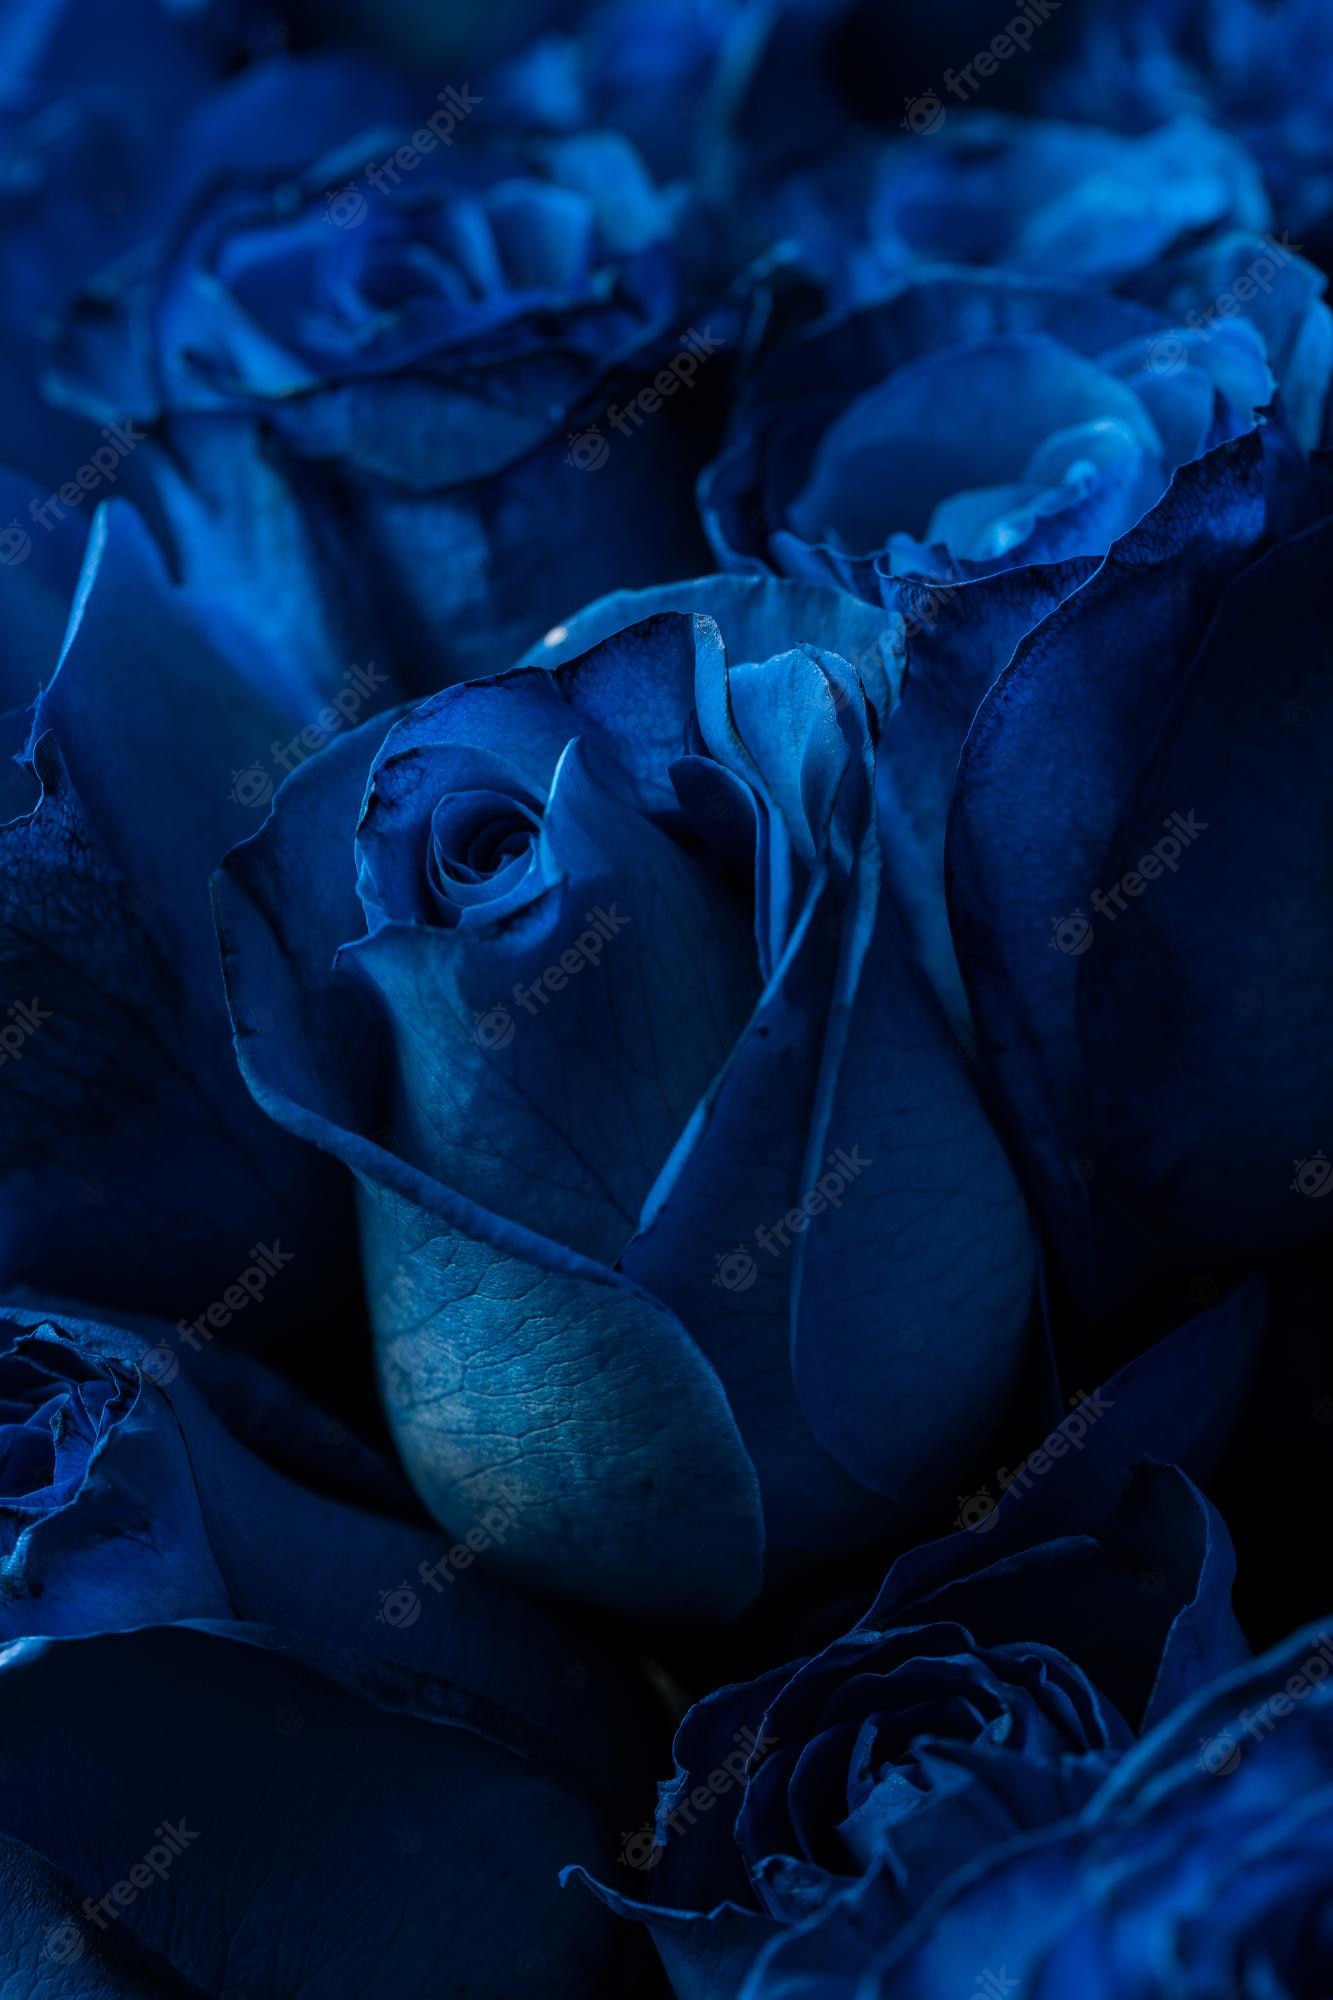 Premium Photo. Bouquet of beautiful blue roses trend color classic blue valentine's day selective focus roses wallpaper